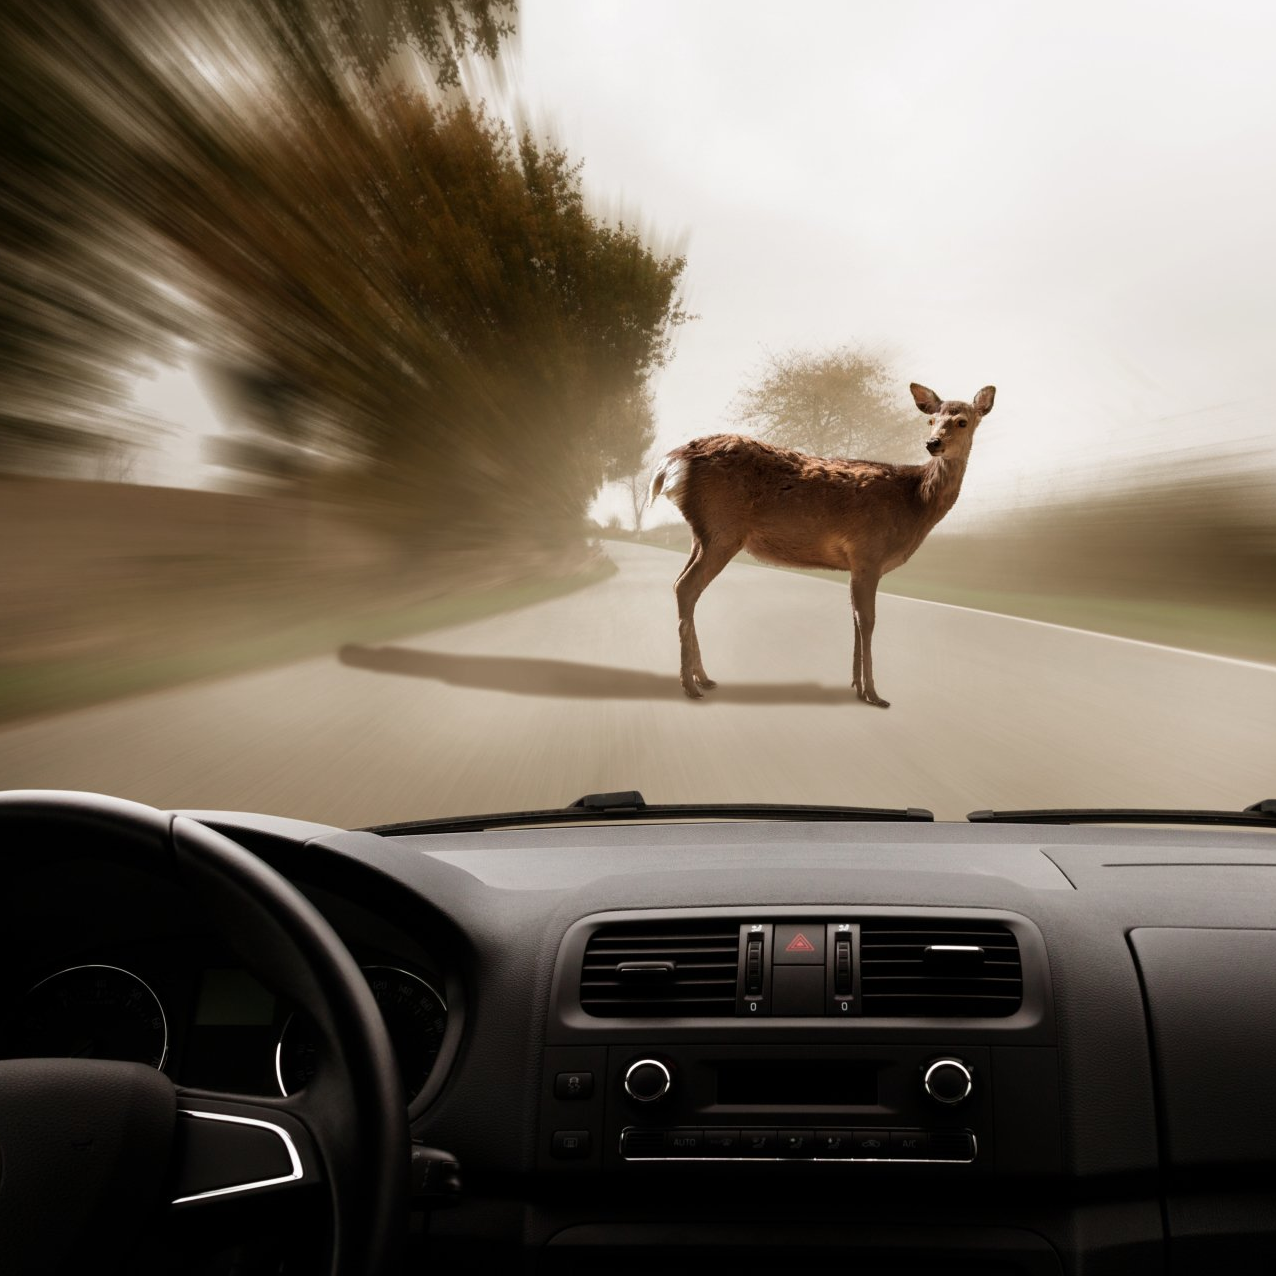 deer collisions in northwest ohio and car insurance